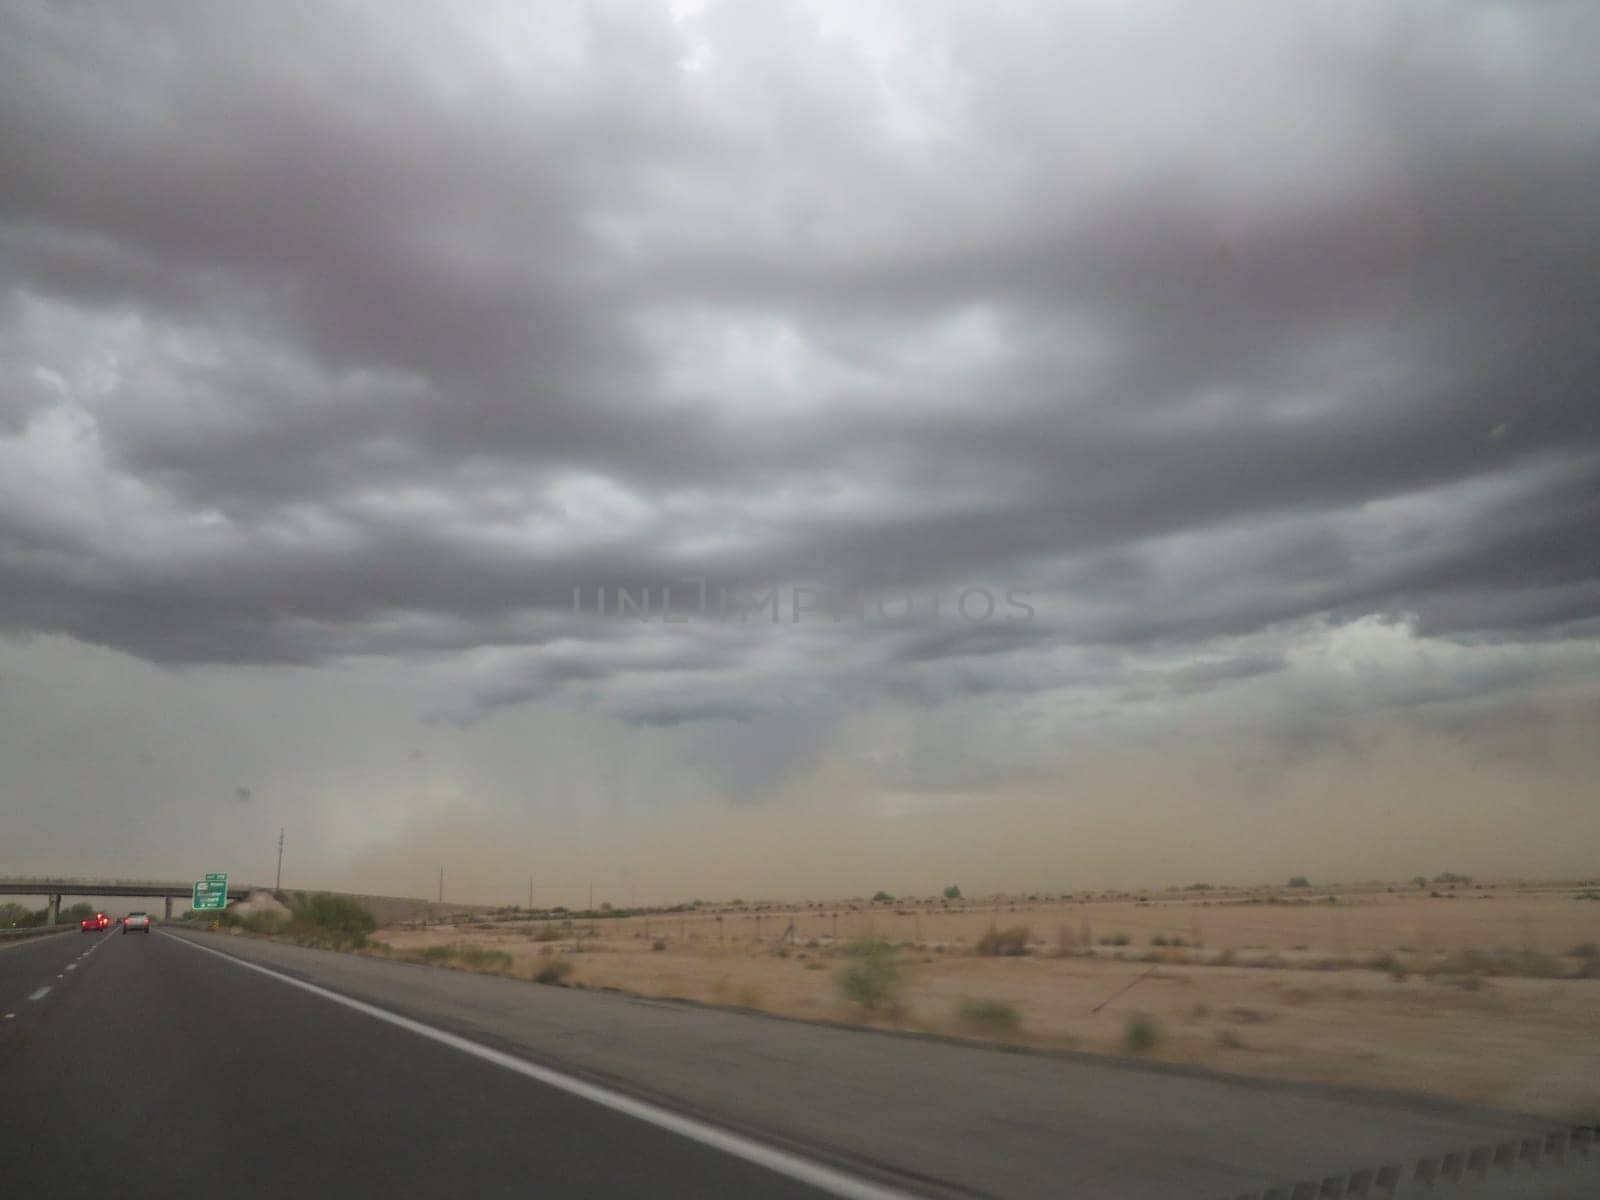 Monsoon Clouds seen from I-10 Driving into Phoenix. High quality photo